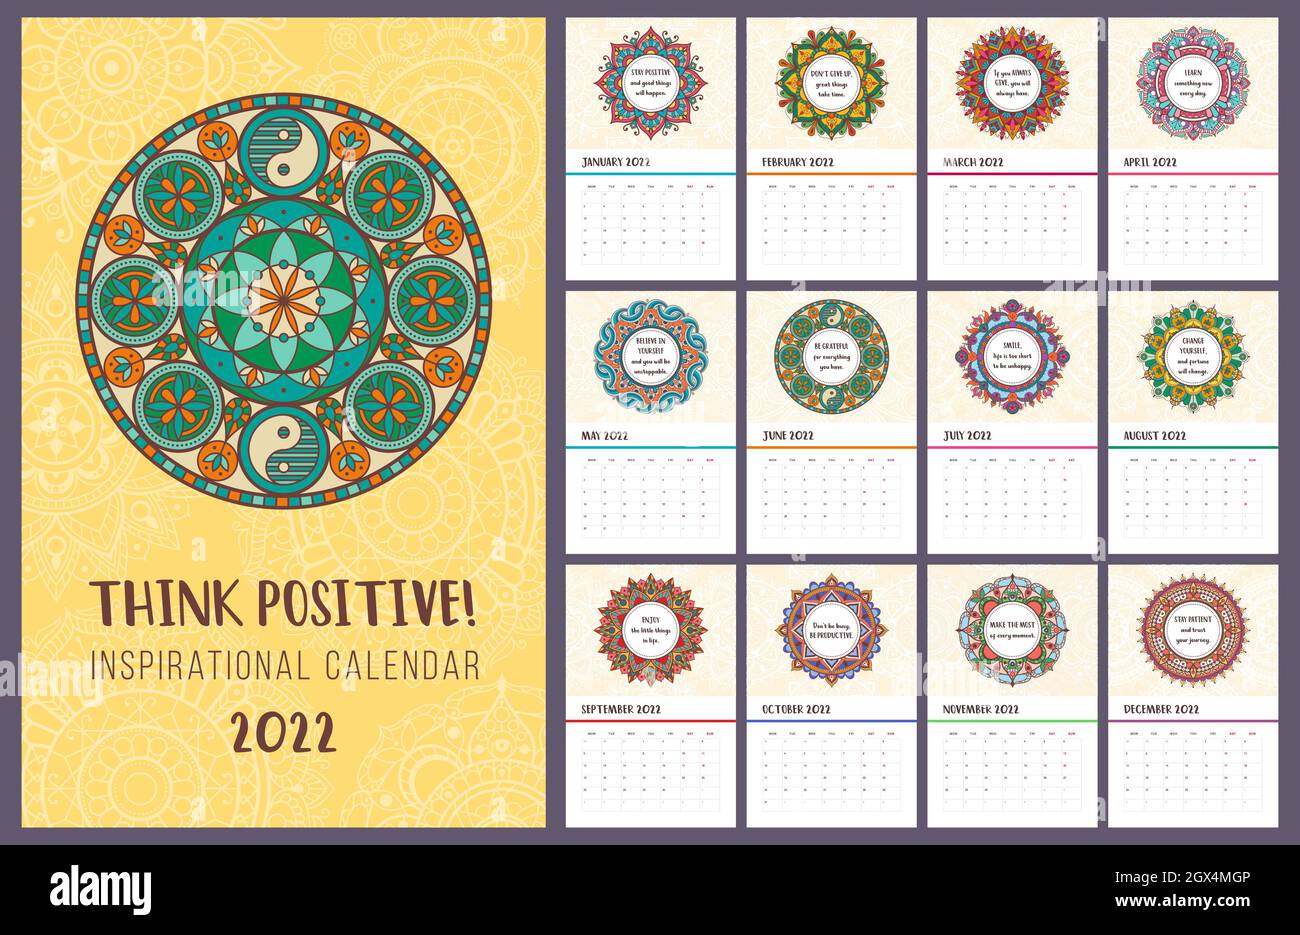 Think Positive Inspirational Calendar 2022 With Quotes And Colorful Mandalas Stock Vector Image Art Alamy